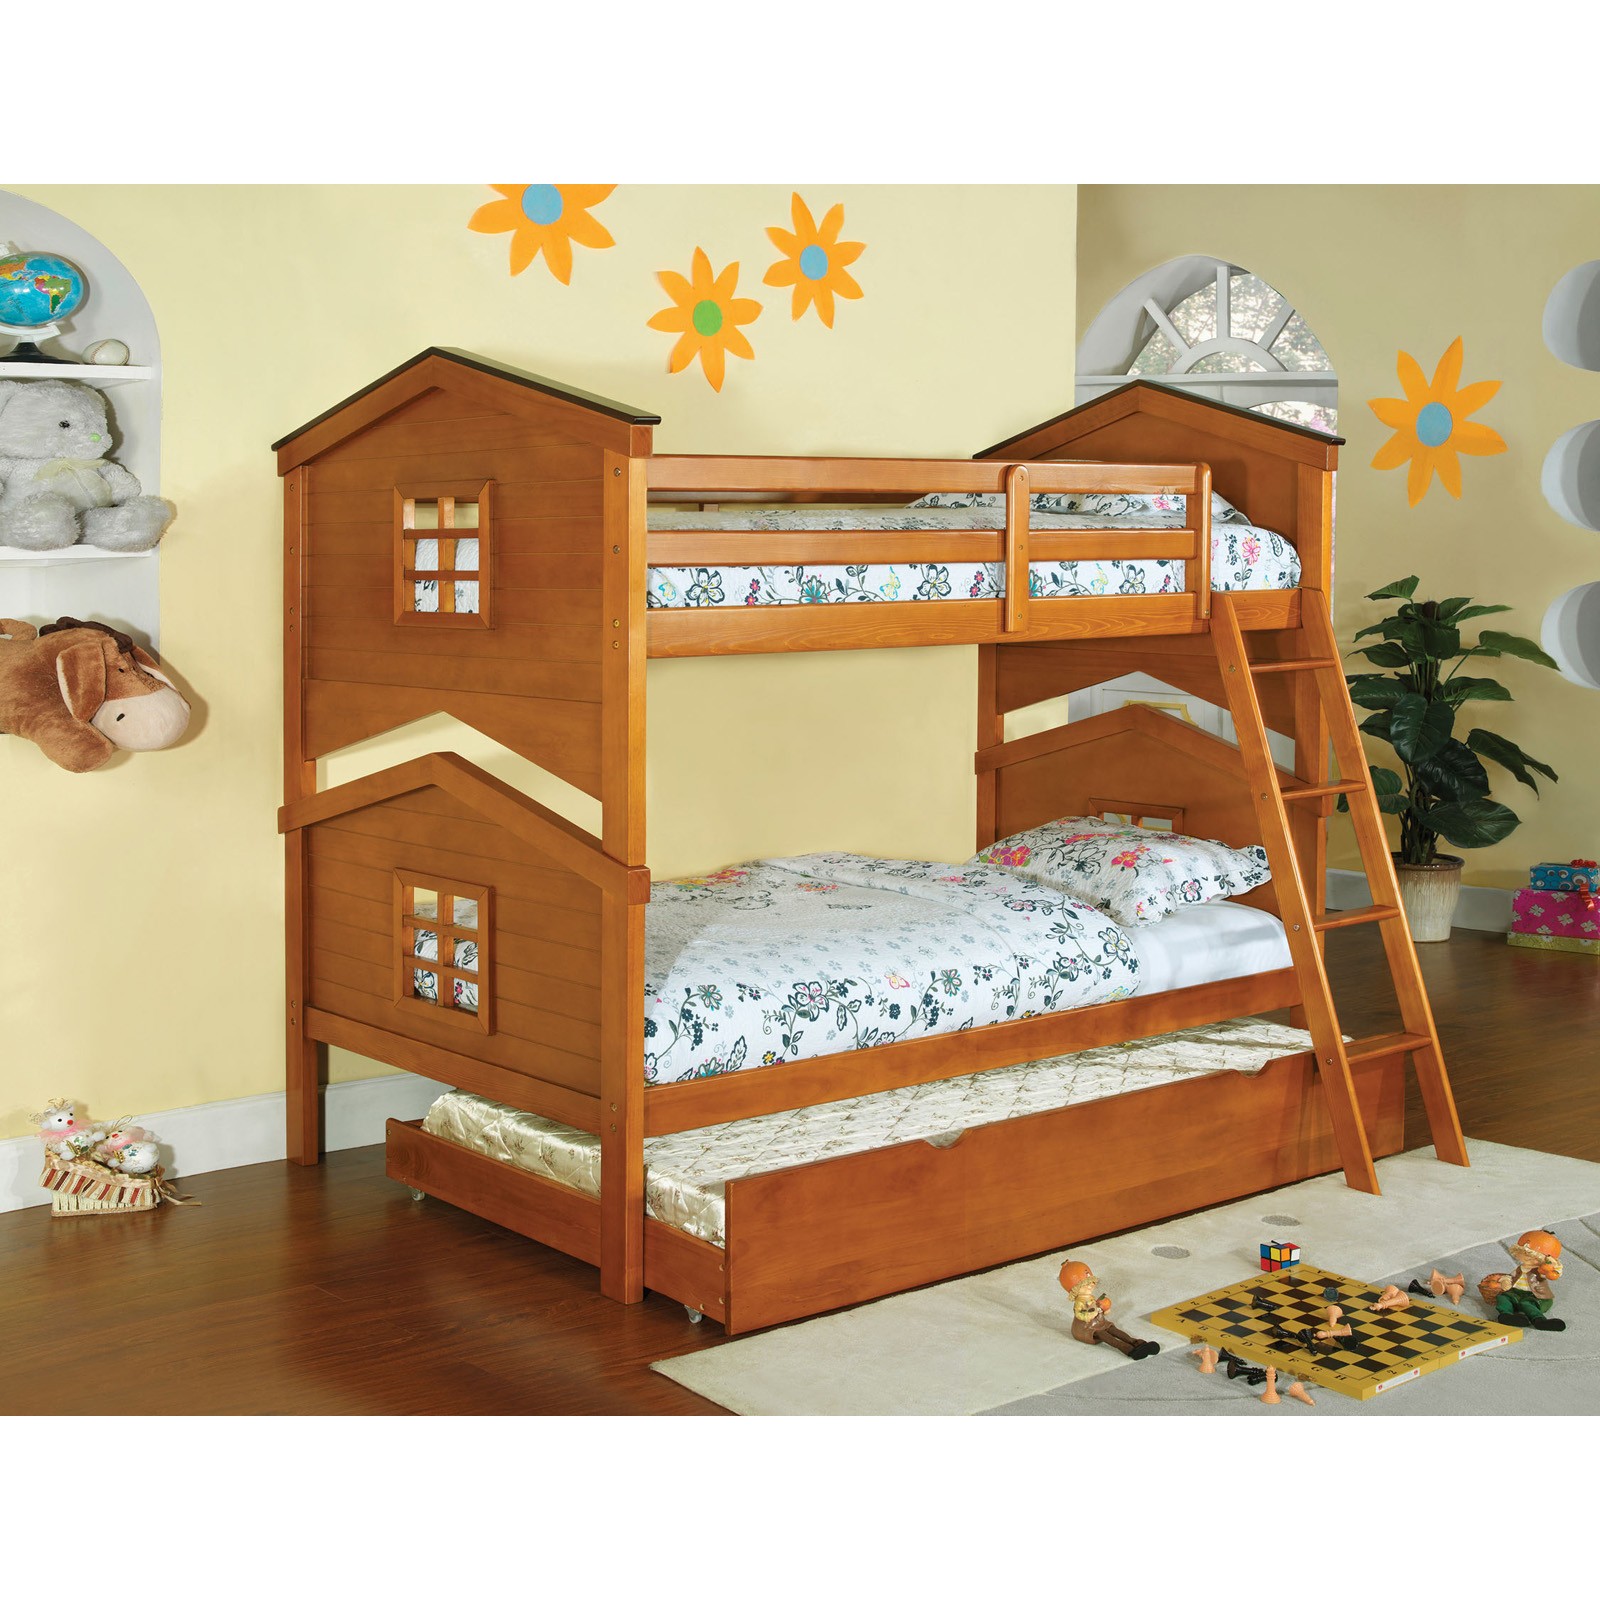 Furniture of america dollhouse twin over twin bunk bed